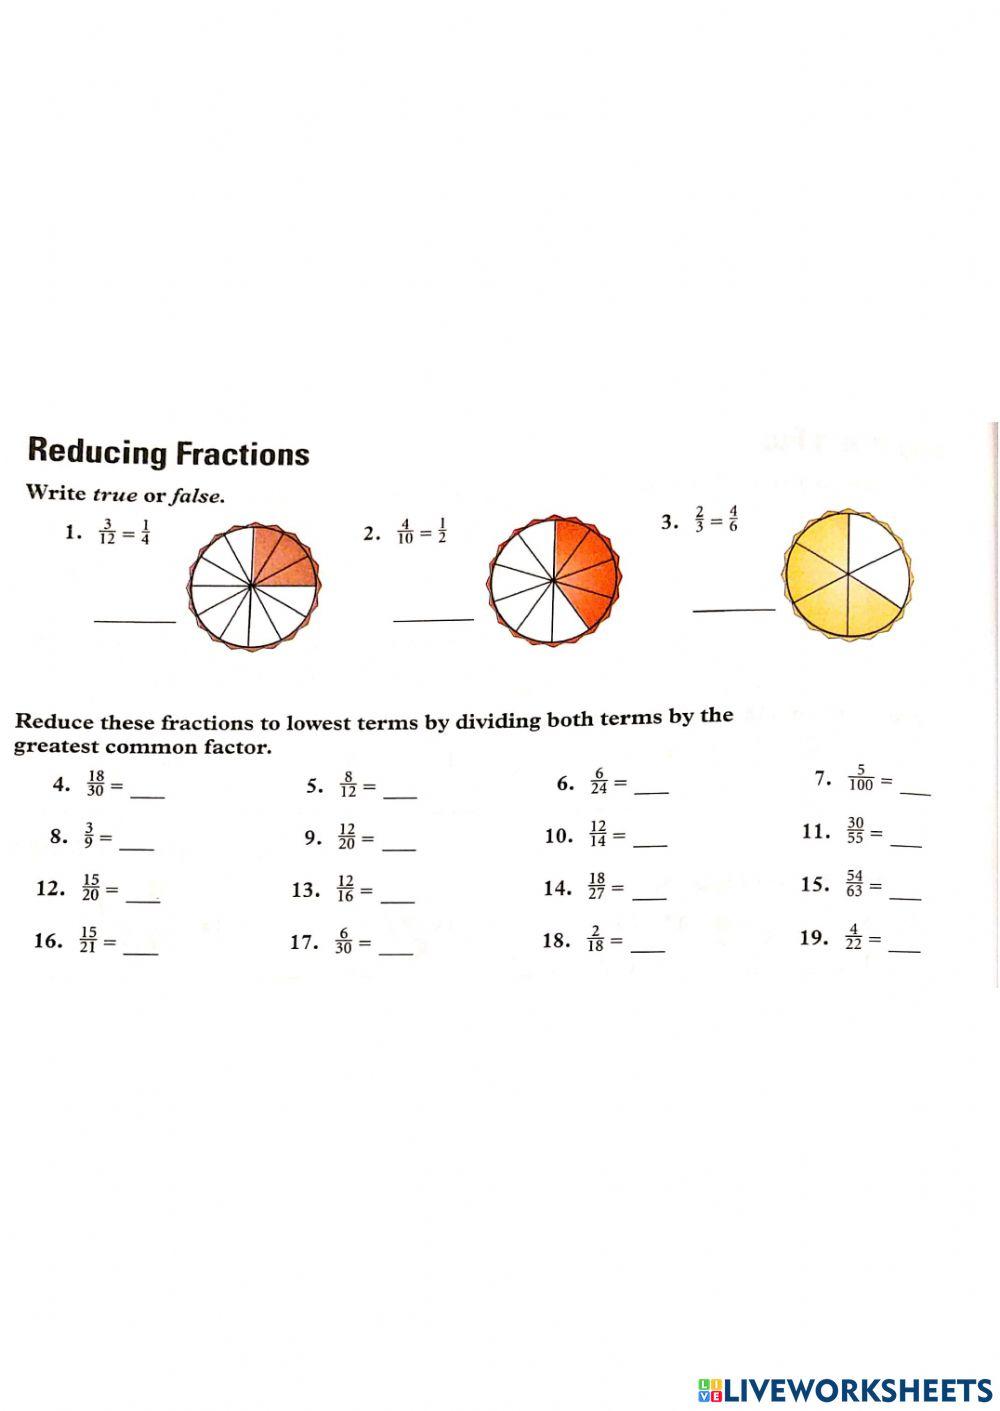 Reducing fractions 2